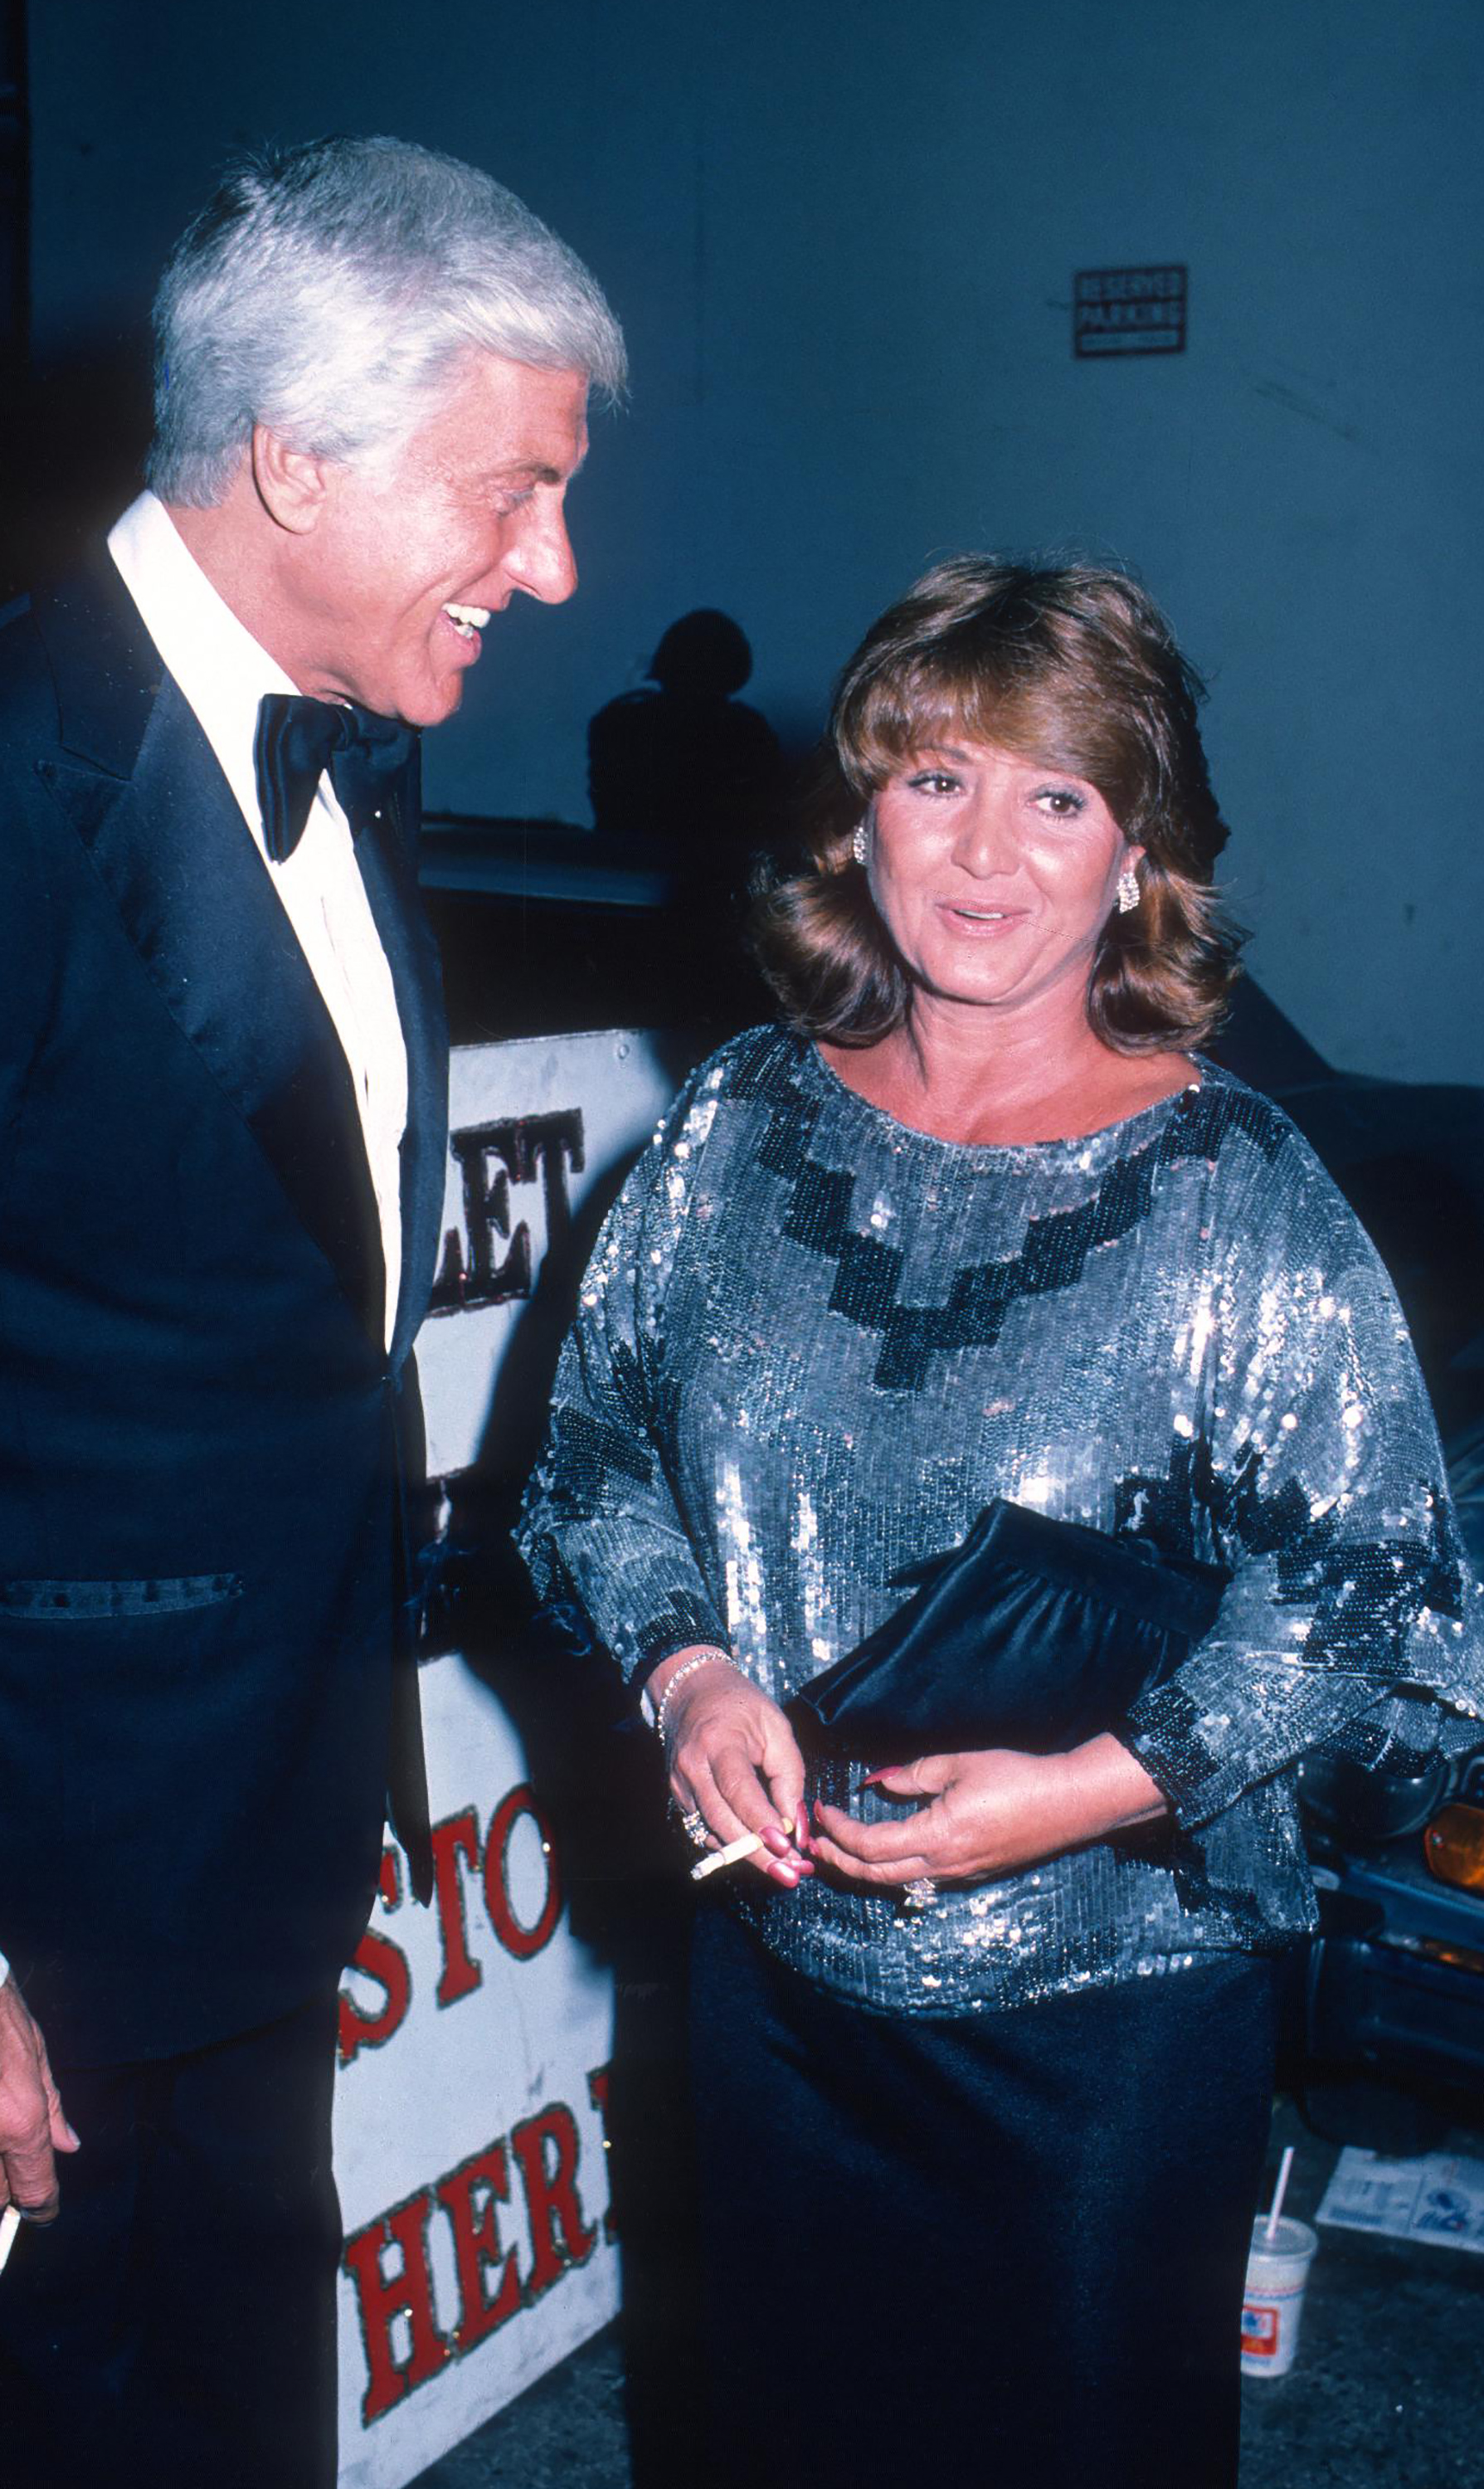 Dick Van Dyke and Michelle Triola attend 15th Annual Los Angeles Drama Critics Circle Awards at Variety Arts Center in Los Angeles, California on April 2, 1984. | Source: Getty Images